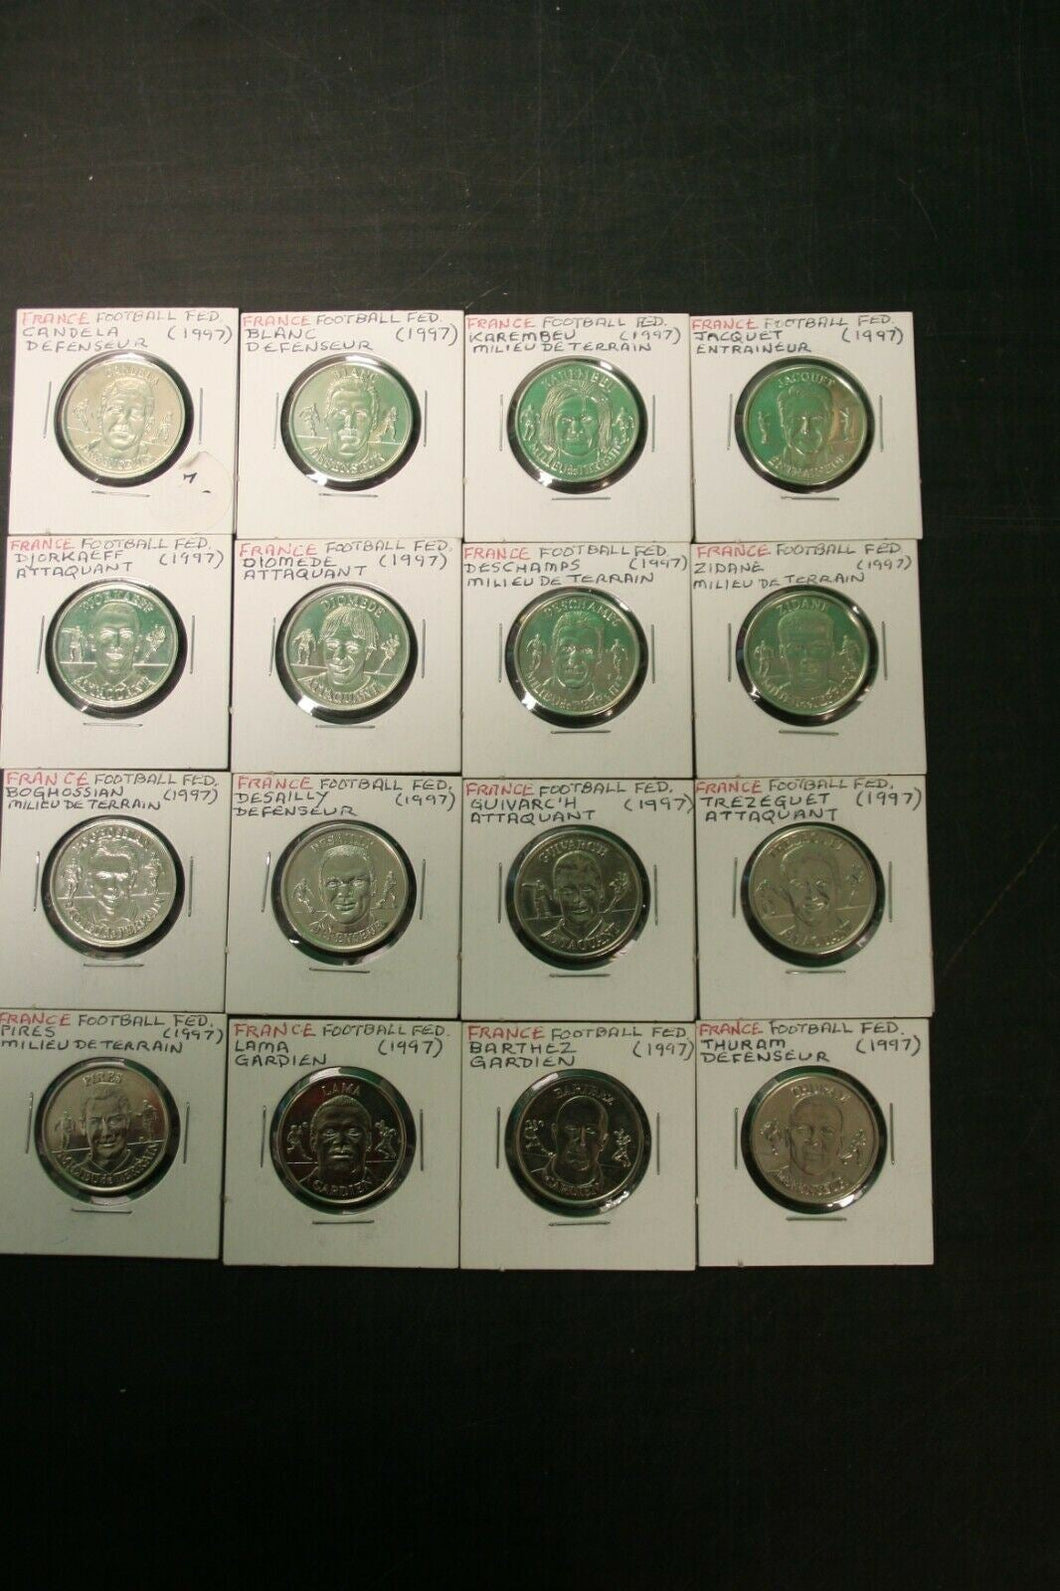 France 1997 Football Federation Lot of 12 Medals Medallions